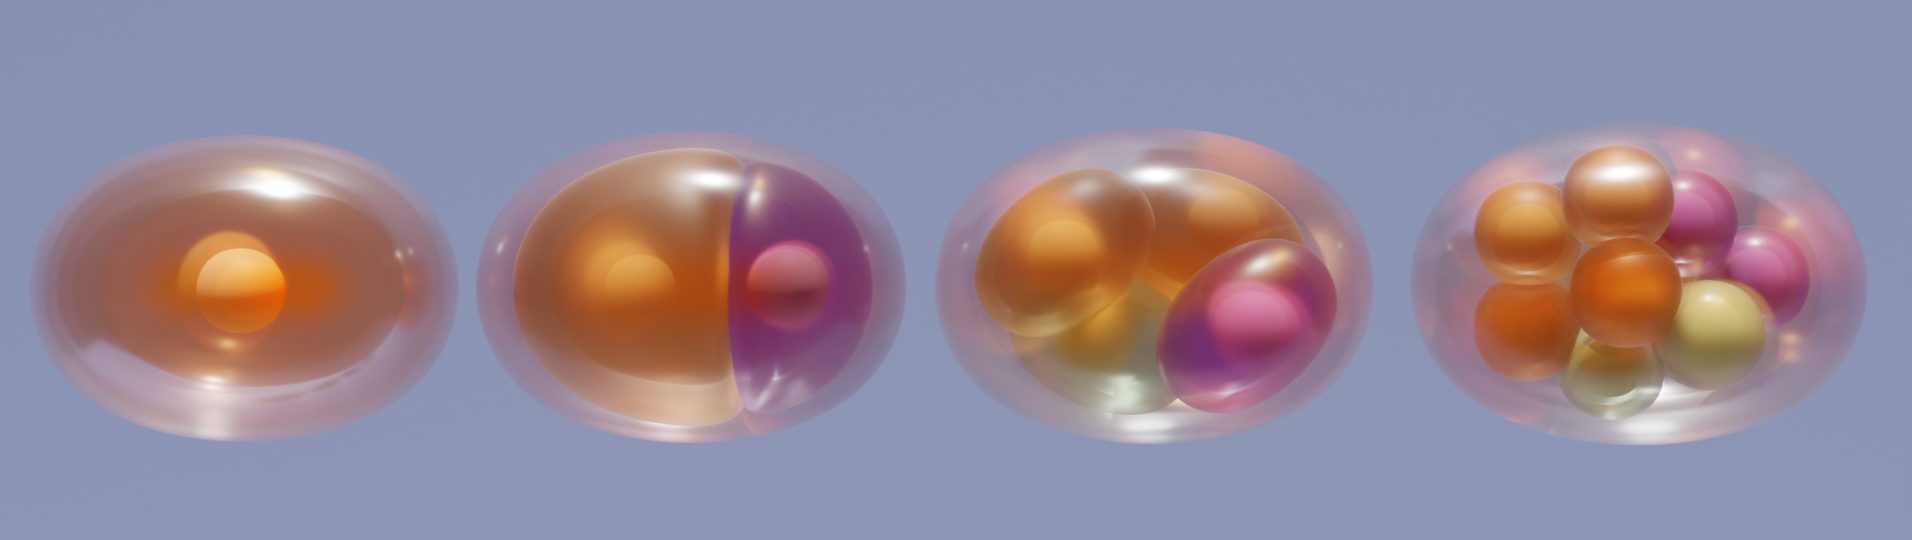 embryos cropped.png